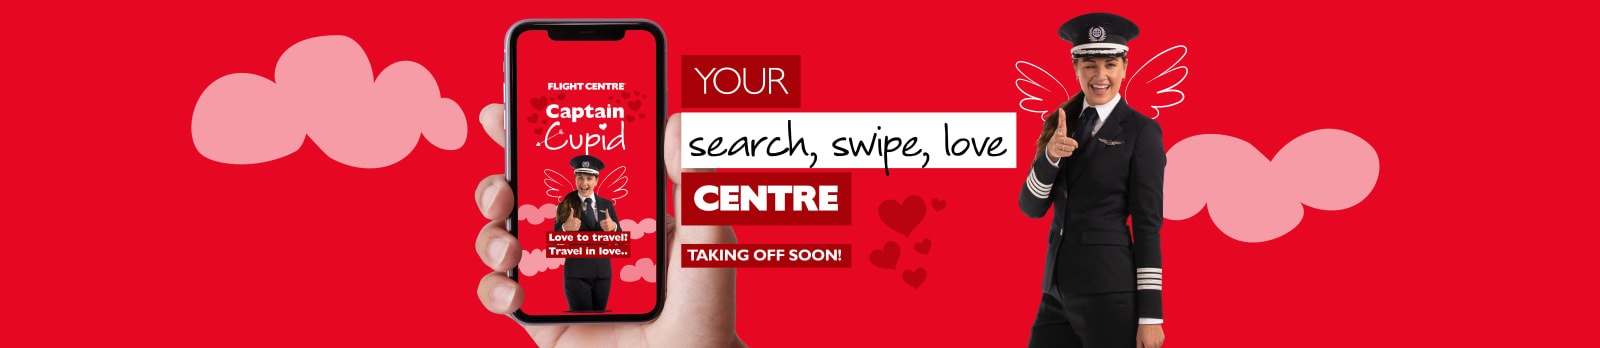 Your search, swipe, love centre - taking off soon! Hand holding a phone with a pilot posing suggestively in front of a red cupid background